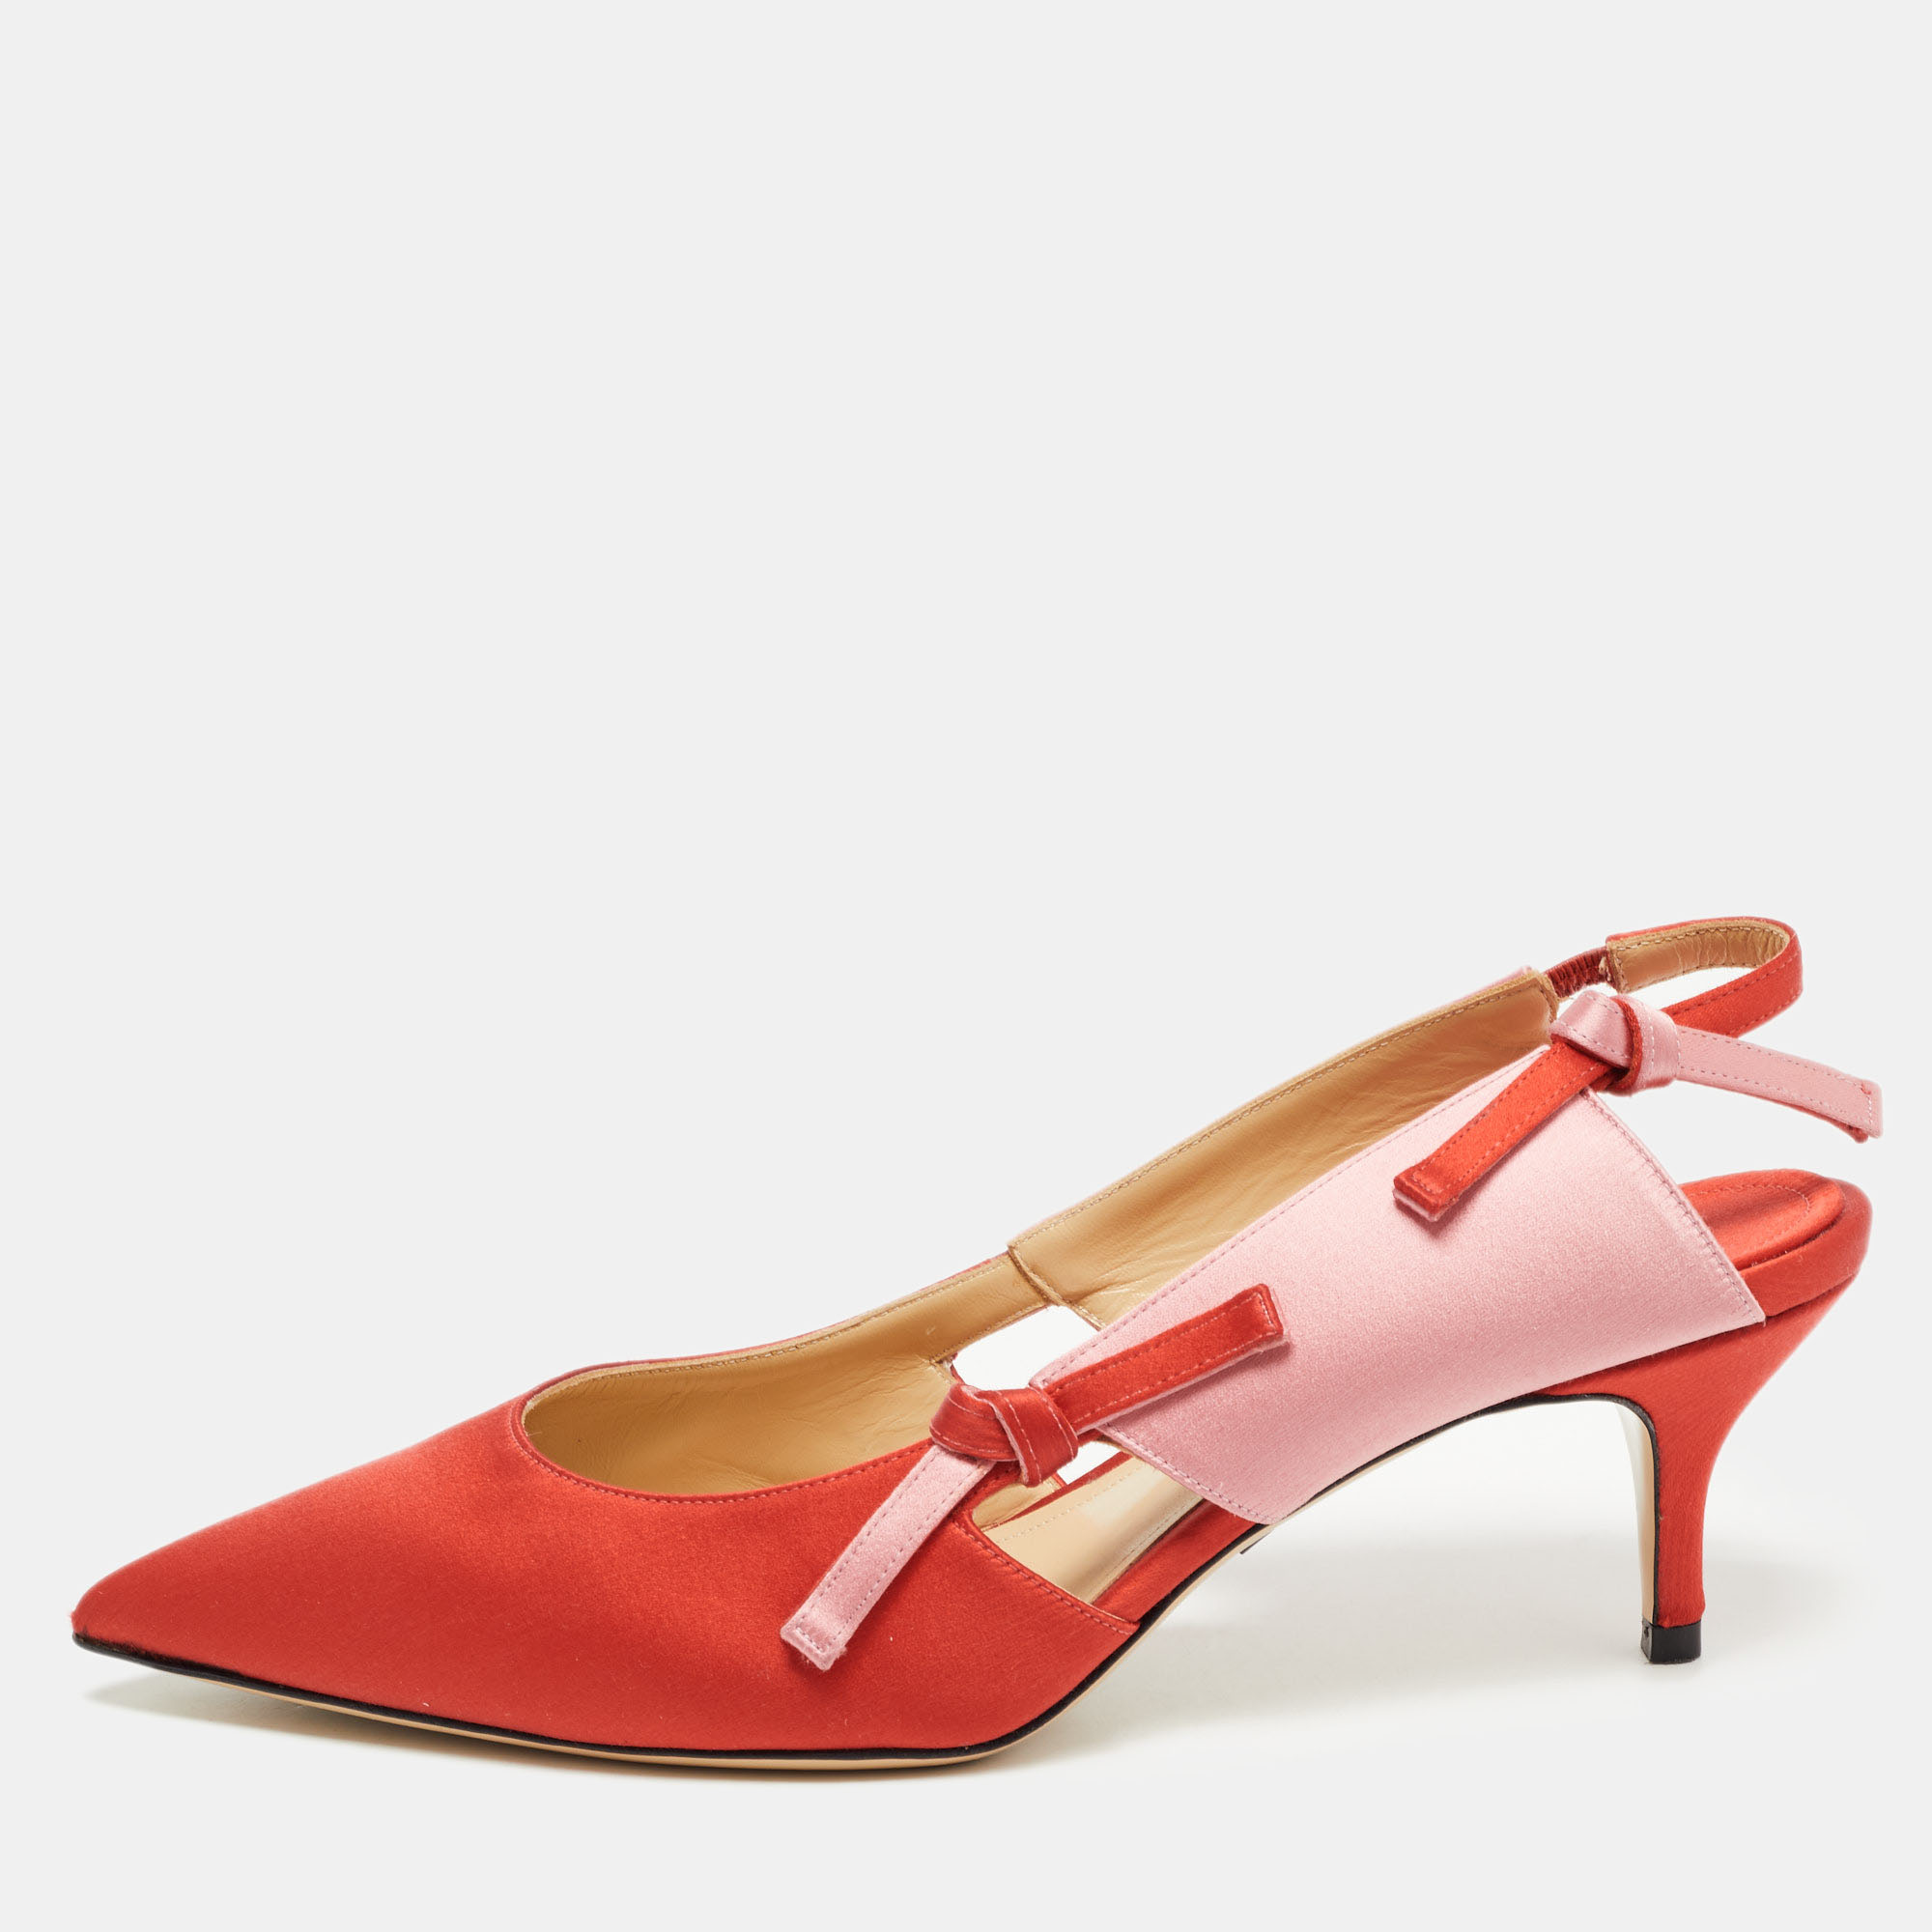 Paul Andrew Red/Pink Satin Bow Slingback Pumps Size 38